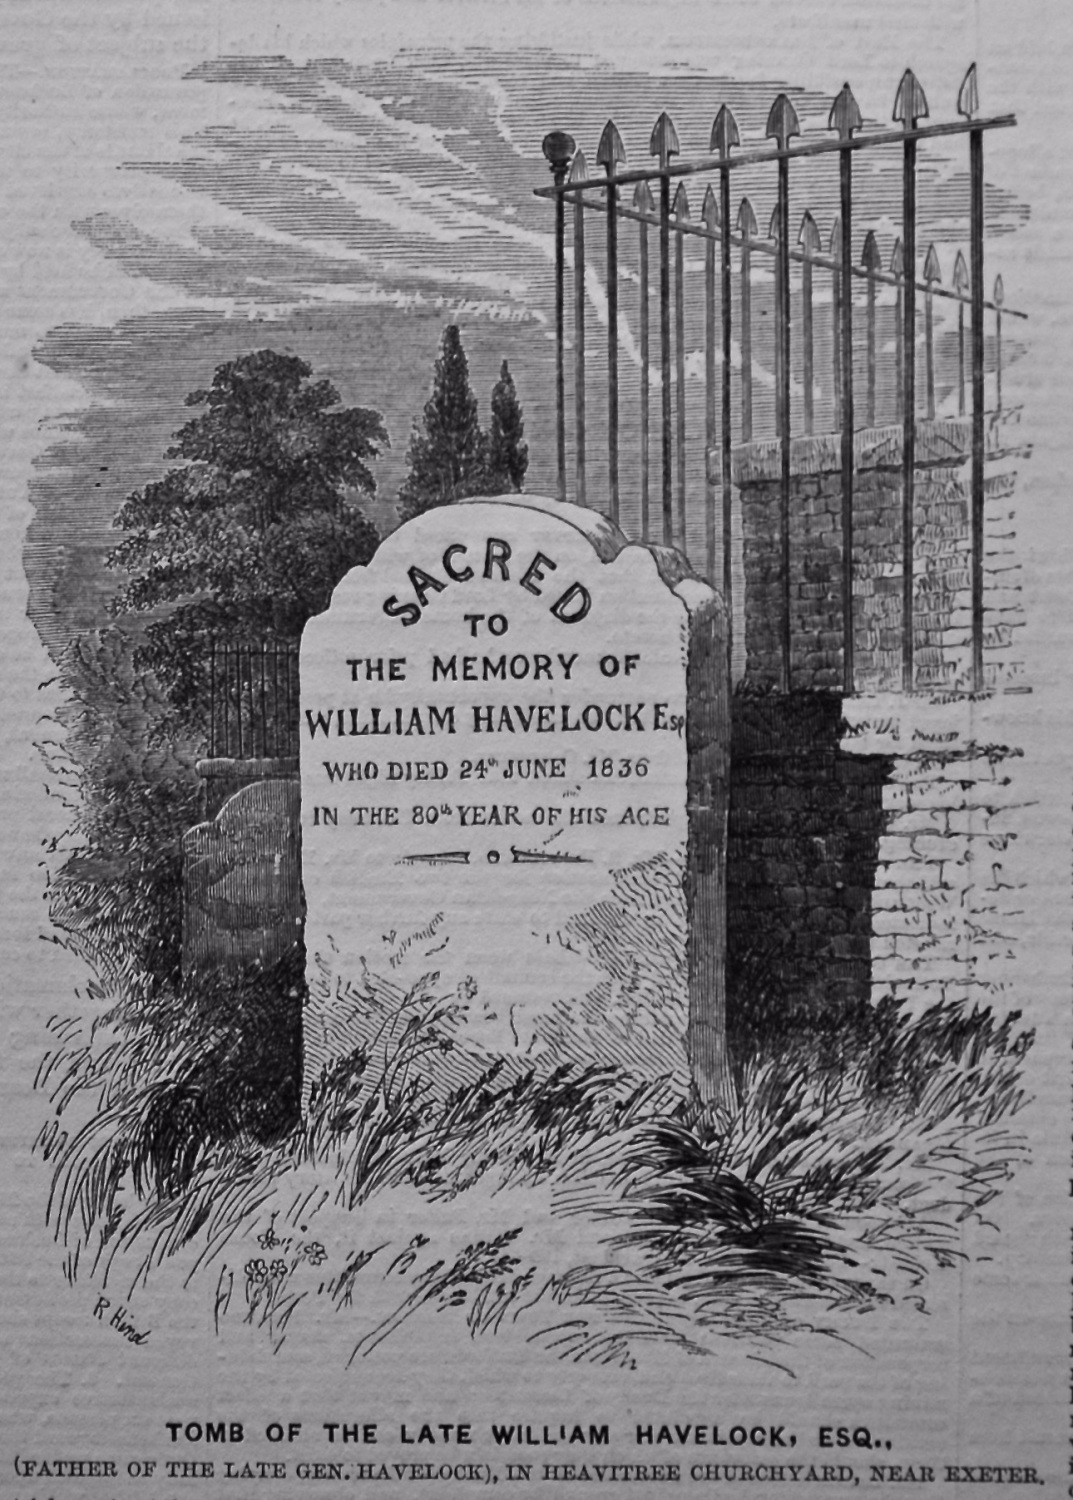 Tomb of the Late William Havelock, Esq., (Father of the Late Gen. Havelock)